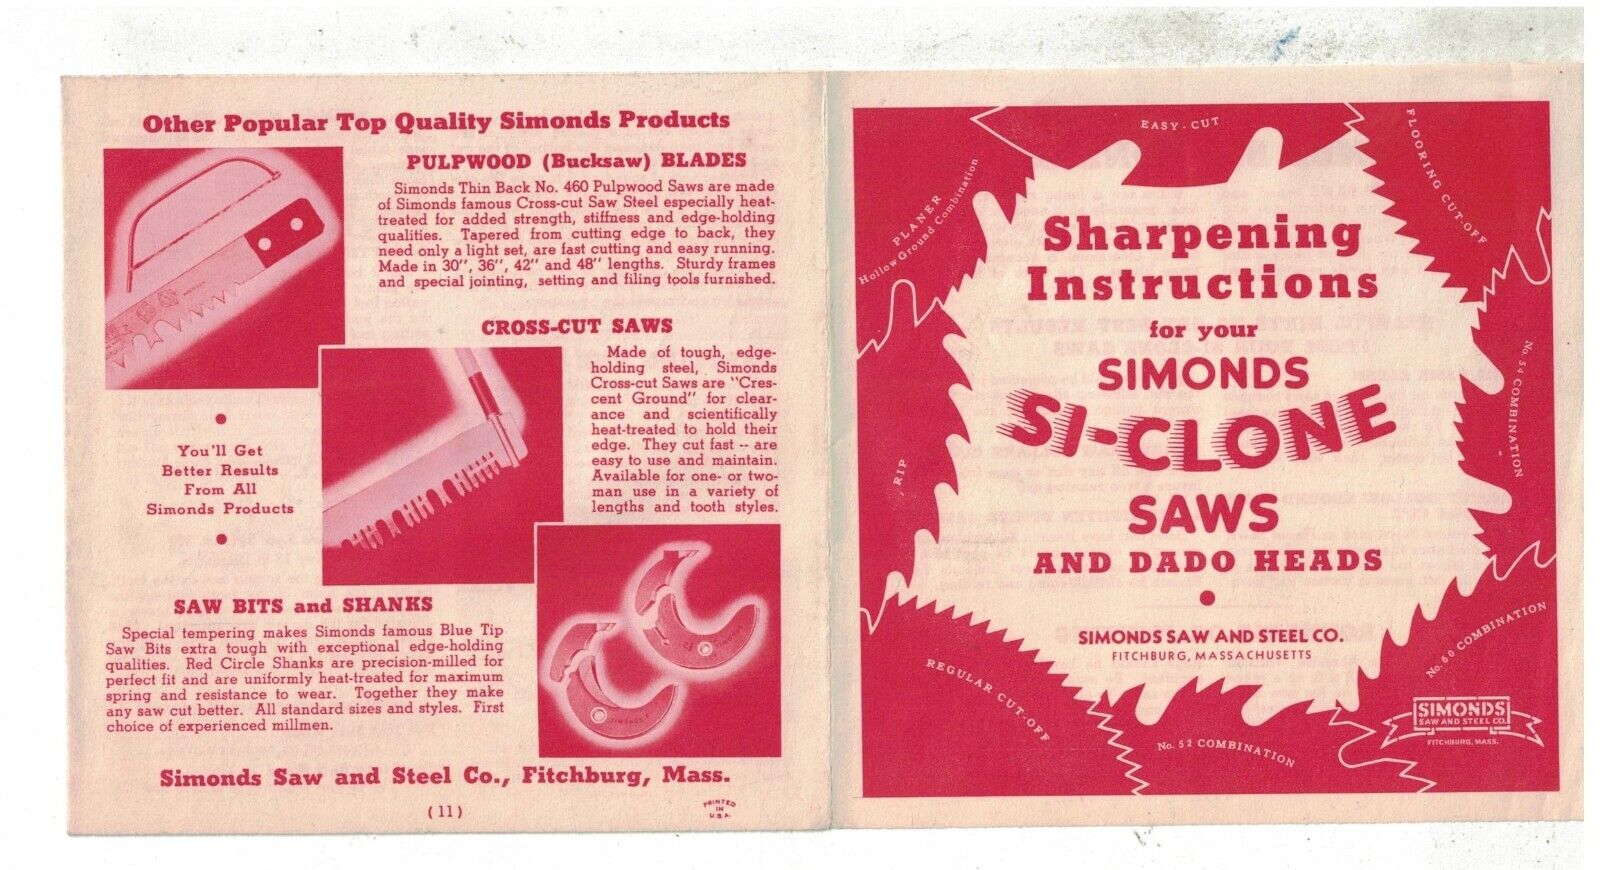 1950s Booklet Sharpening Instructions Simonds Saws and Dado Heads